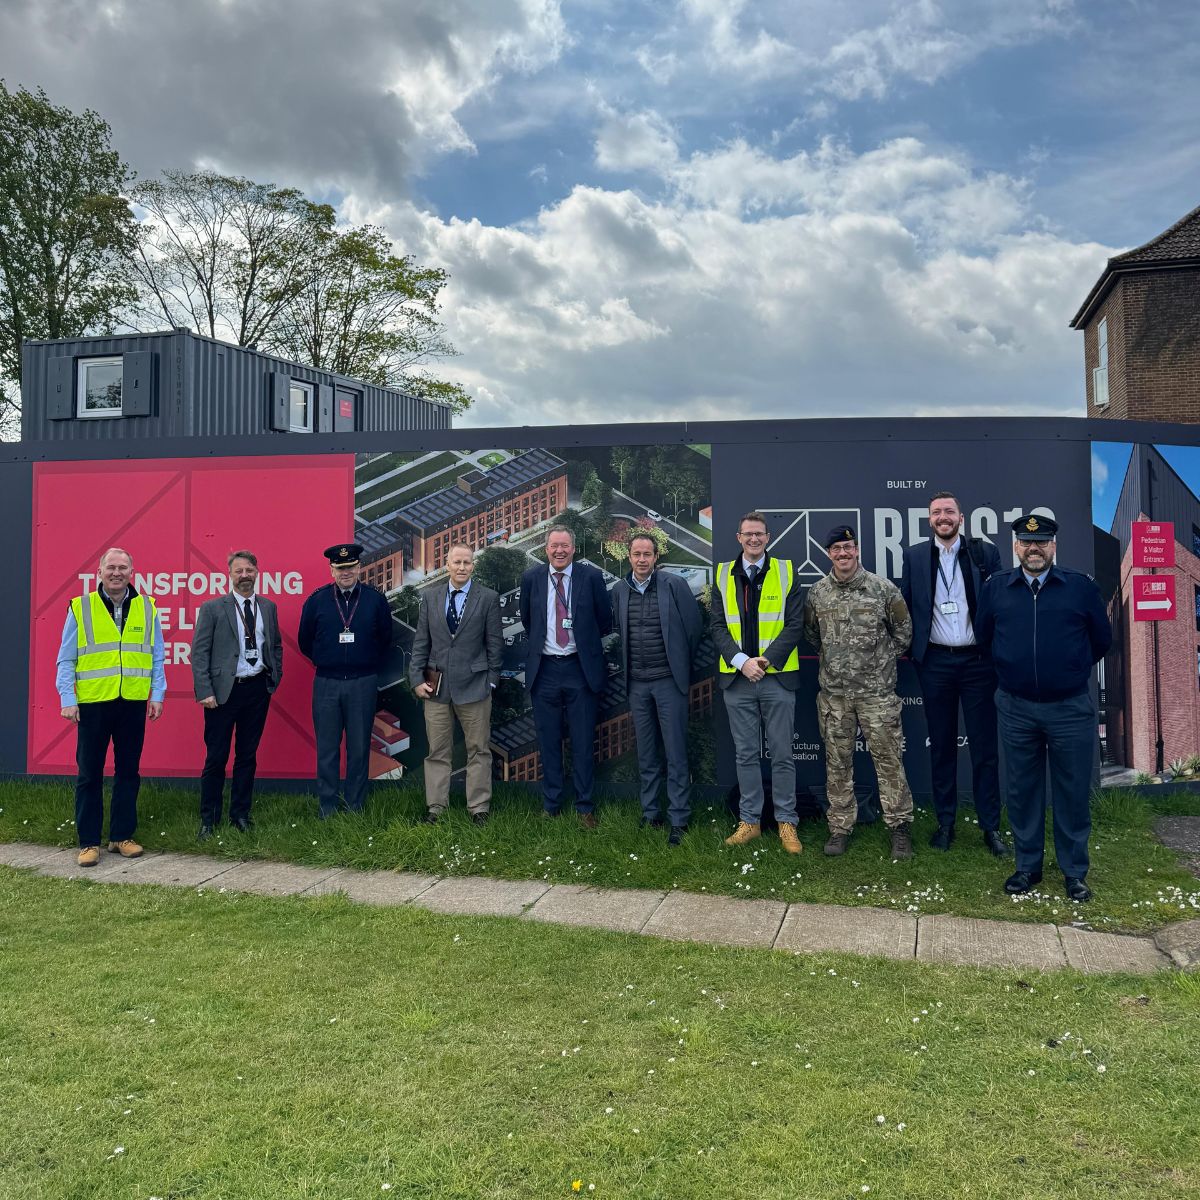 It was a pleasure to host senior @mod_dio & Air Infra personnel on our site at @RoyalAirForce (RAF) Marham on Monday. @VIVODefence @ArcadisGlobal @HLMArchitects